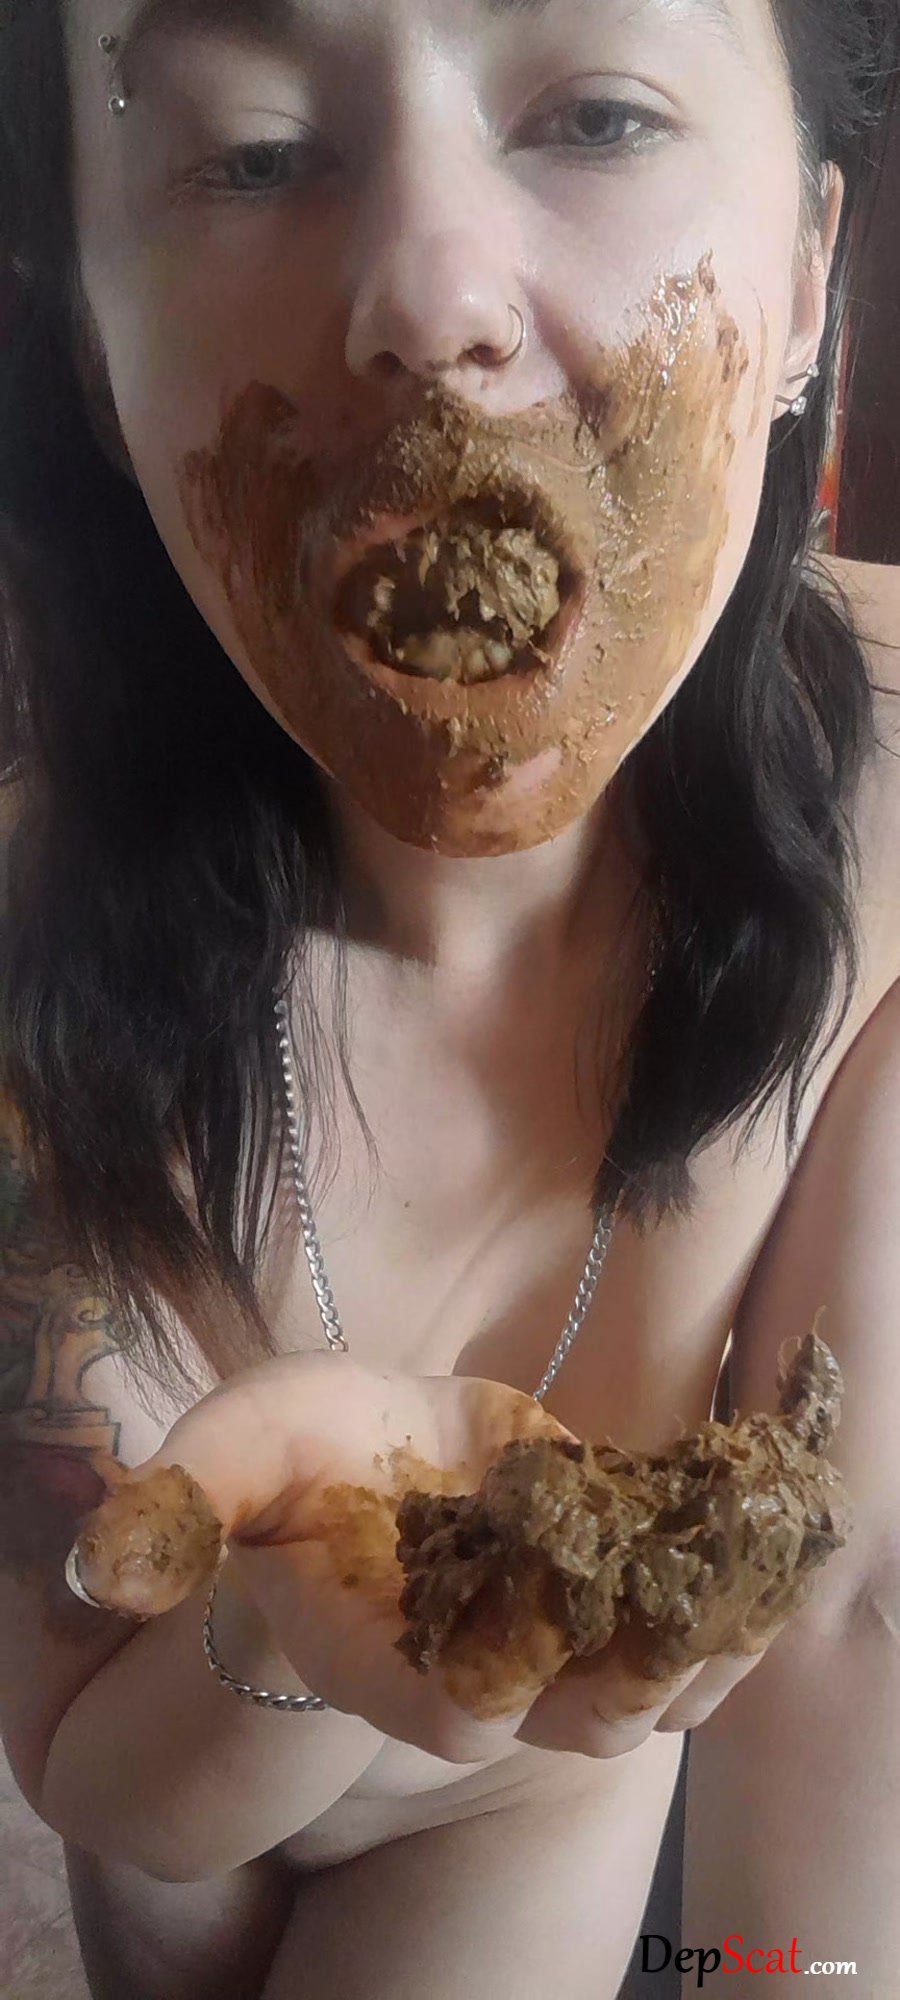 Poop Videos: (LiliXXXFetish) - Poo Naked in Kitchen Sink, Smearing Face, Mouth Full of Poo [UltraHD 2K] - Eating, Solo